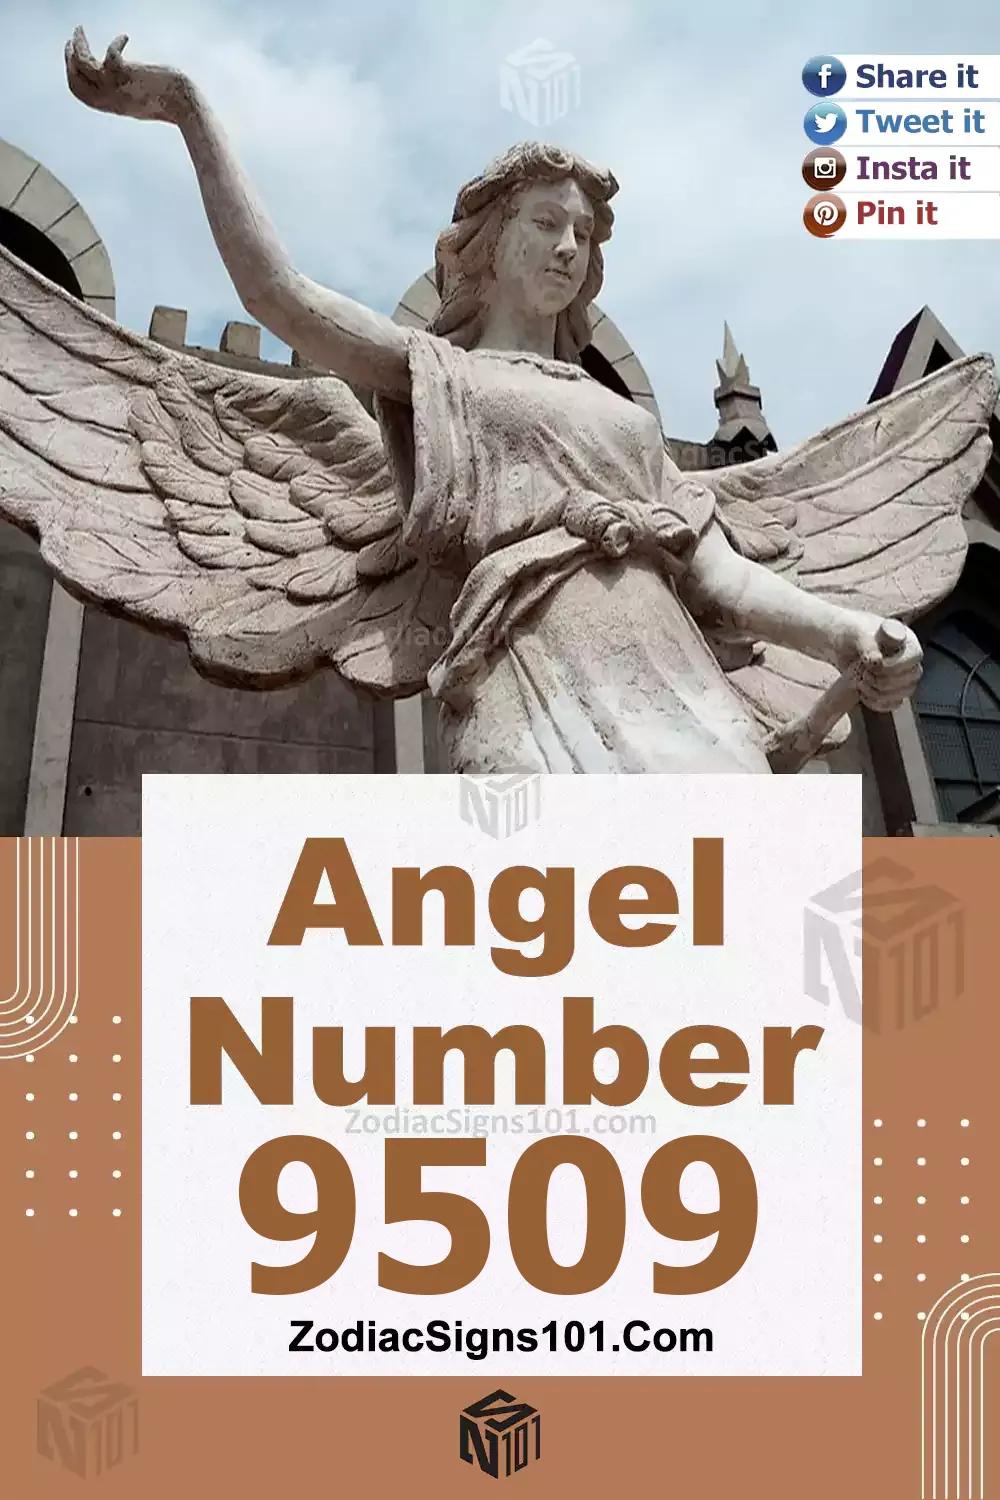 9509 Angel Number Meaning